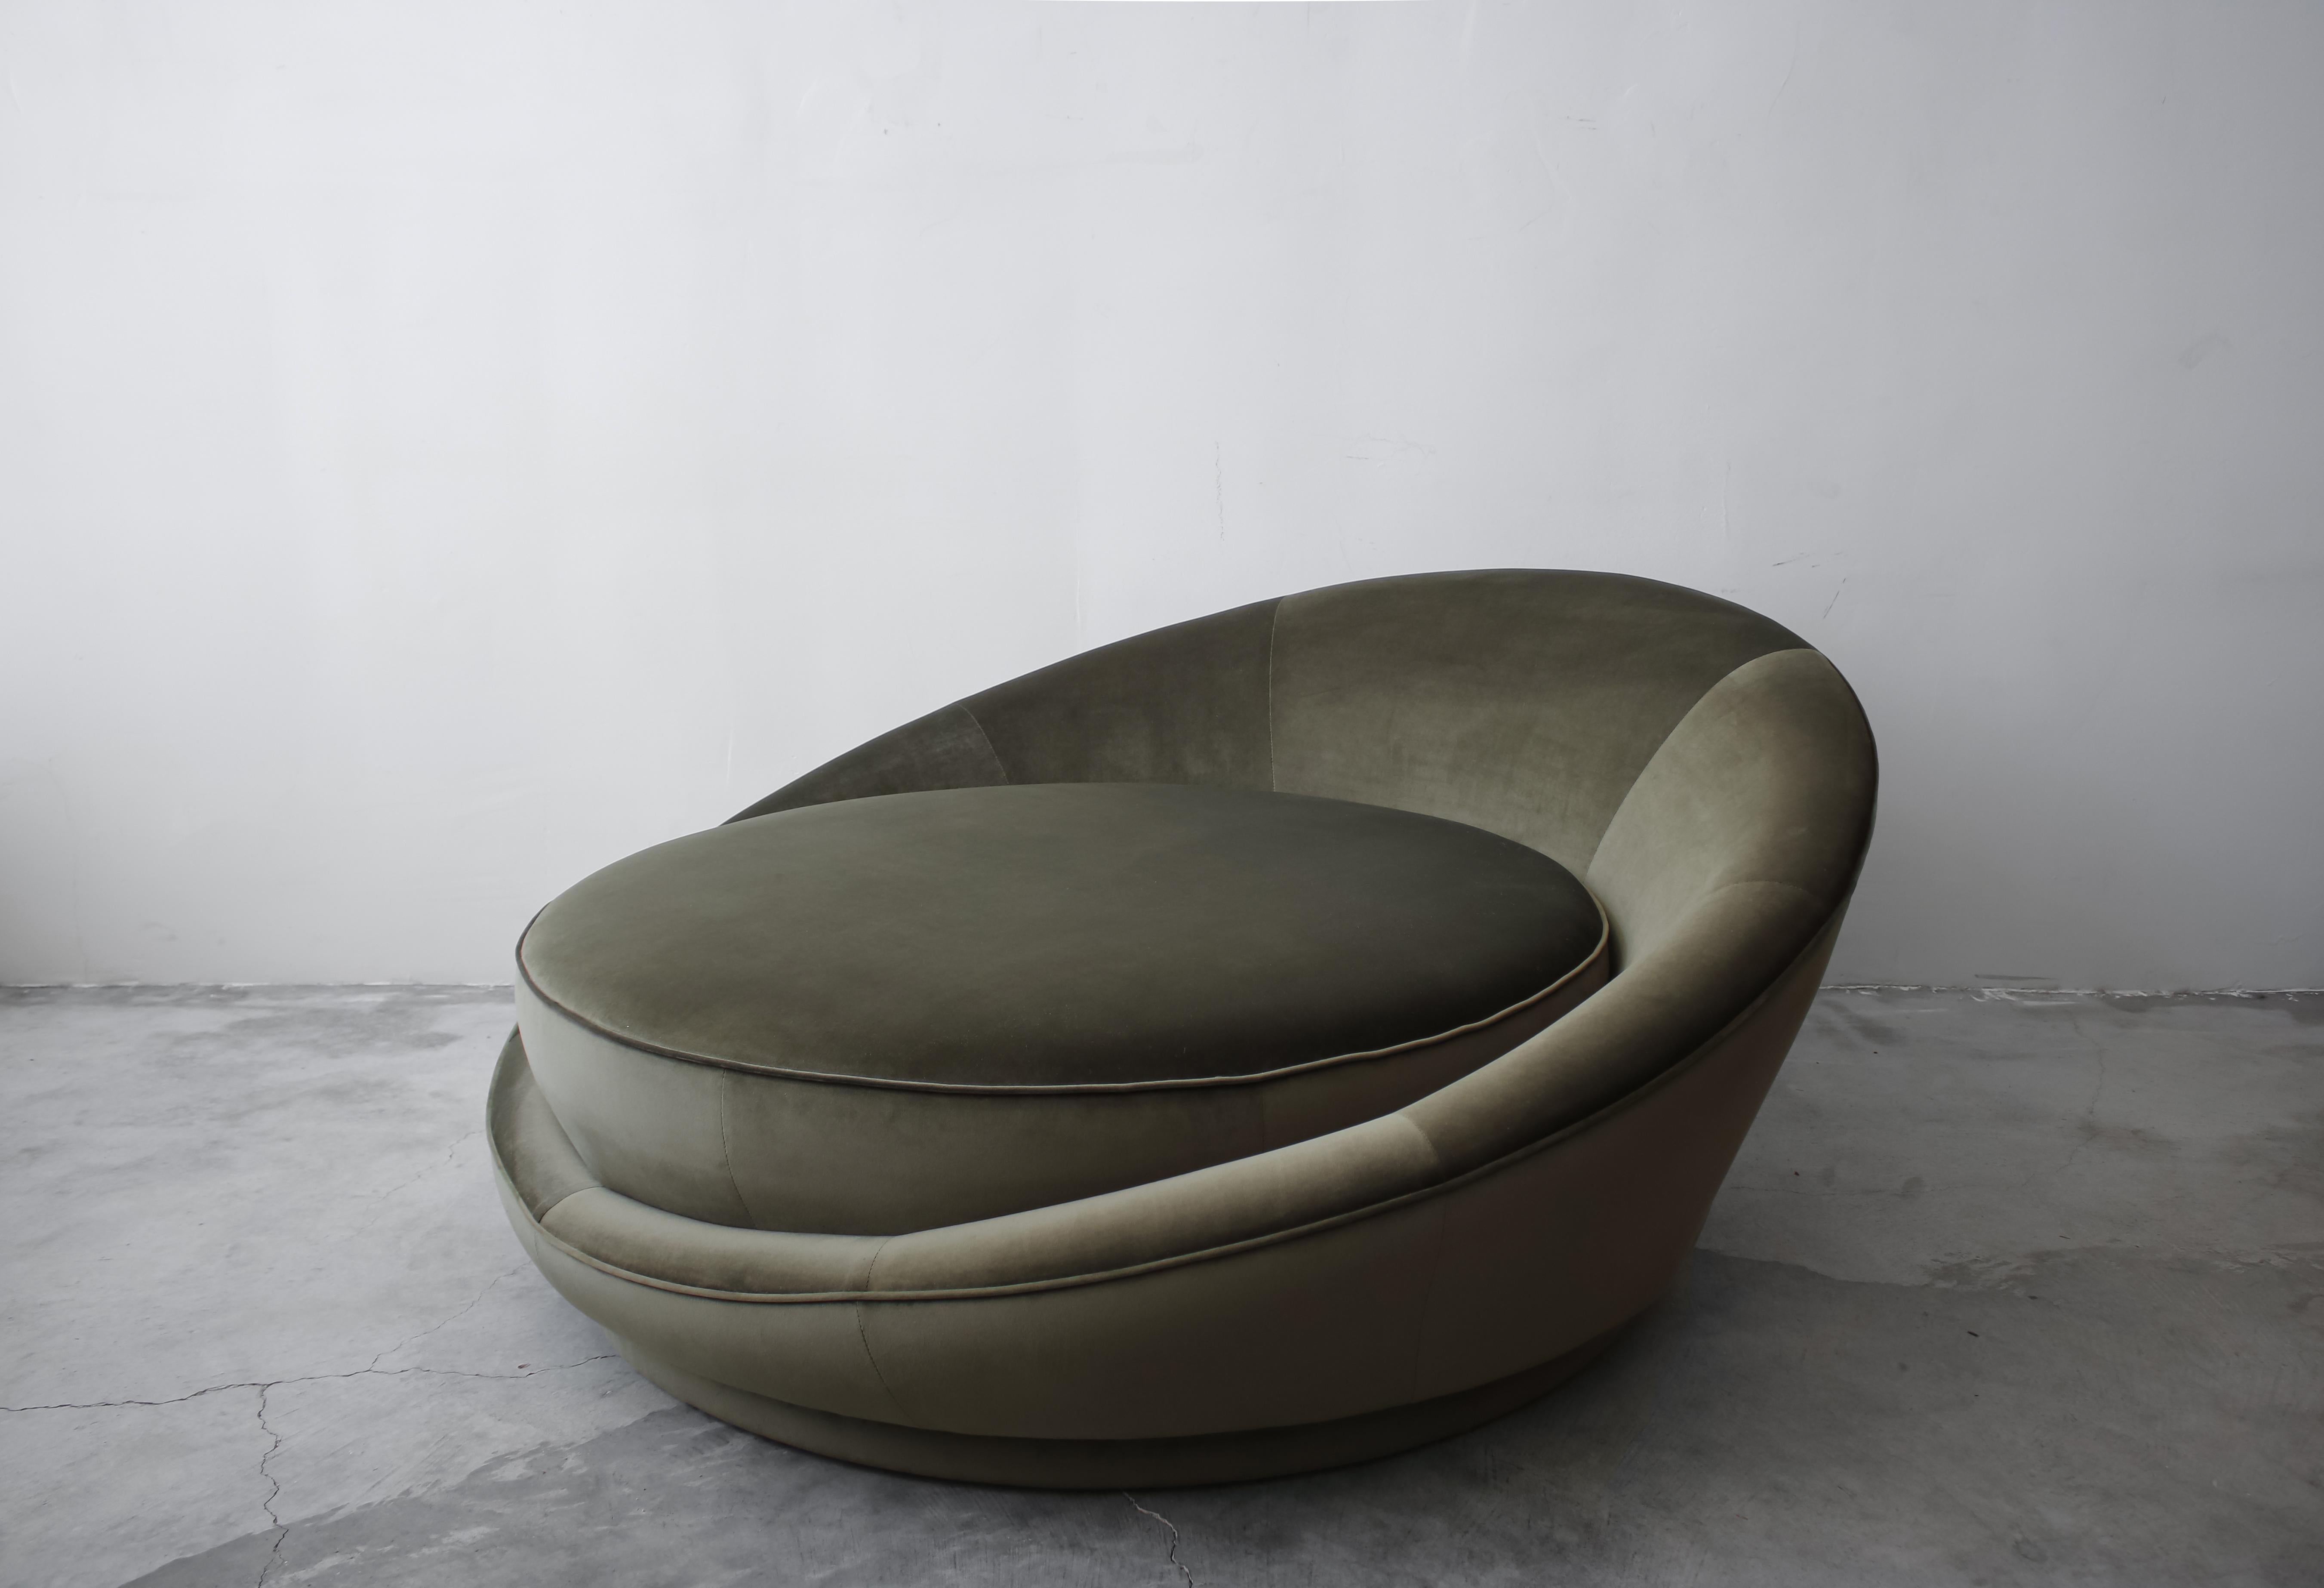 Midcentury oversized circular chaise, cuddle style chair by Milo Baughman for Thayer Coggin. Perfect for that cozy corner.

Chair has been professionally reupholstered in a beautiful green micro velvet and is ready for its new home.